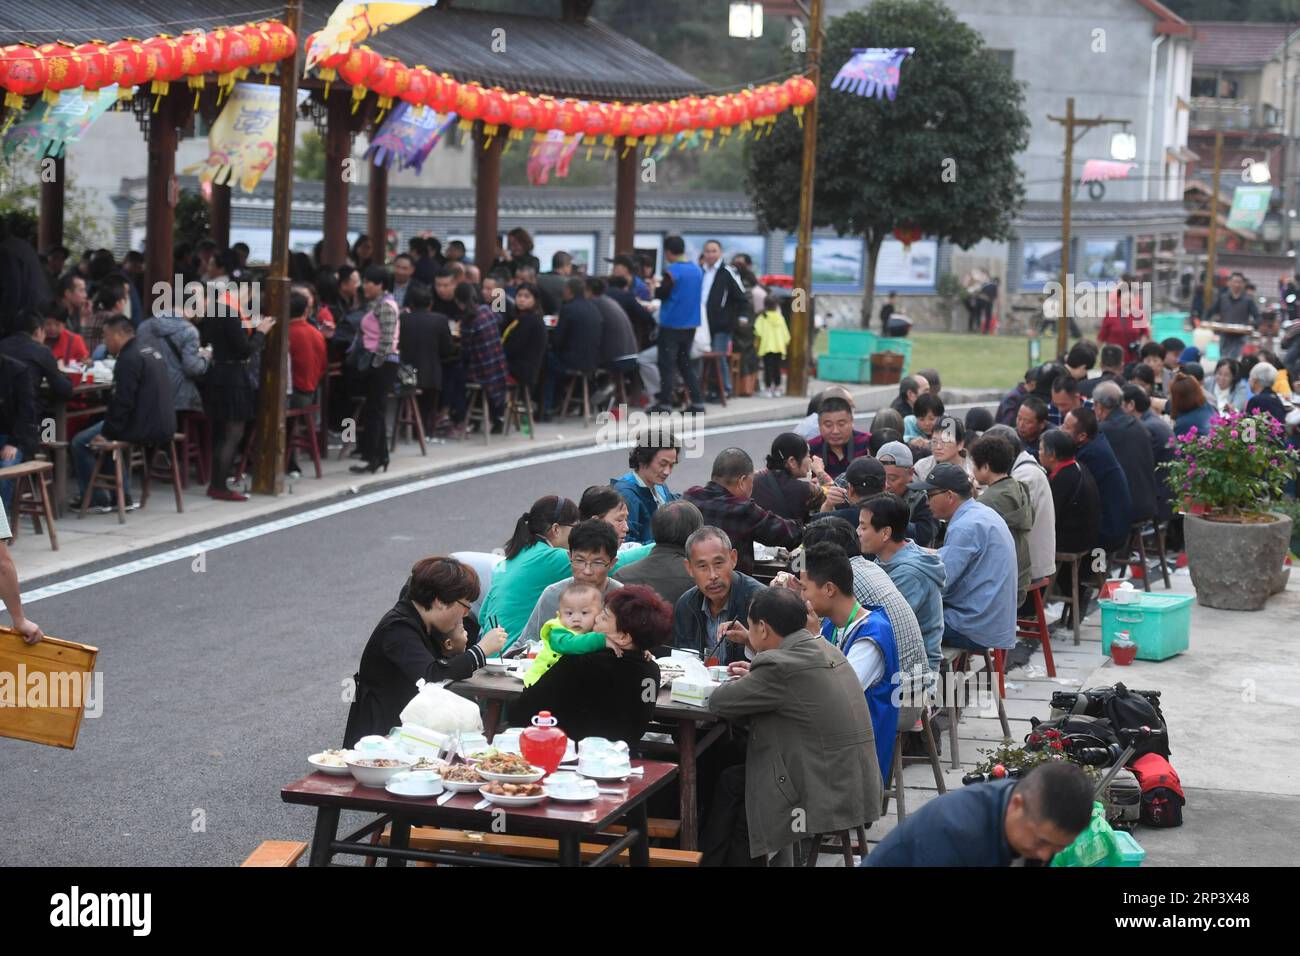 (181018) -- TONGLU, Oct. 18, 2018 (Xinhua) -- Local residents and tourists enjoy the long-table banquet held at Longfeng Ethnic Village in Eshan Township of the She ethnic group of Tonglu County, east China s Zhejiang Province, Oct. 17, 2018. A total of 100 tables of delicacies were presented at the long-table banquet along a street held at the village, attracting local residents as well as tourists to enjoy the food of the She ethnic group. (Xinhua/Huang Zongzhi)(sxk) CHINA-ZHEJIANG-TONGLU-LONG-TABLE BANQUET (CN) PUBLICATIONxNOTxINxCHN Stock Photo